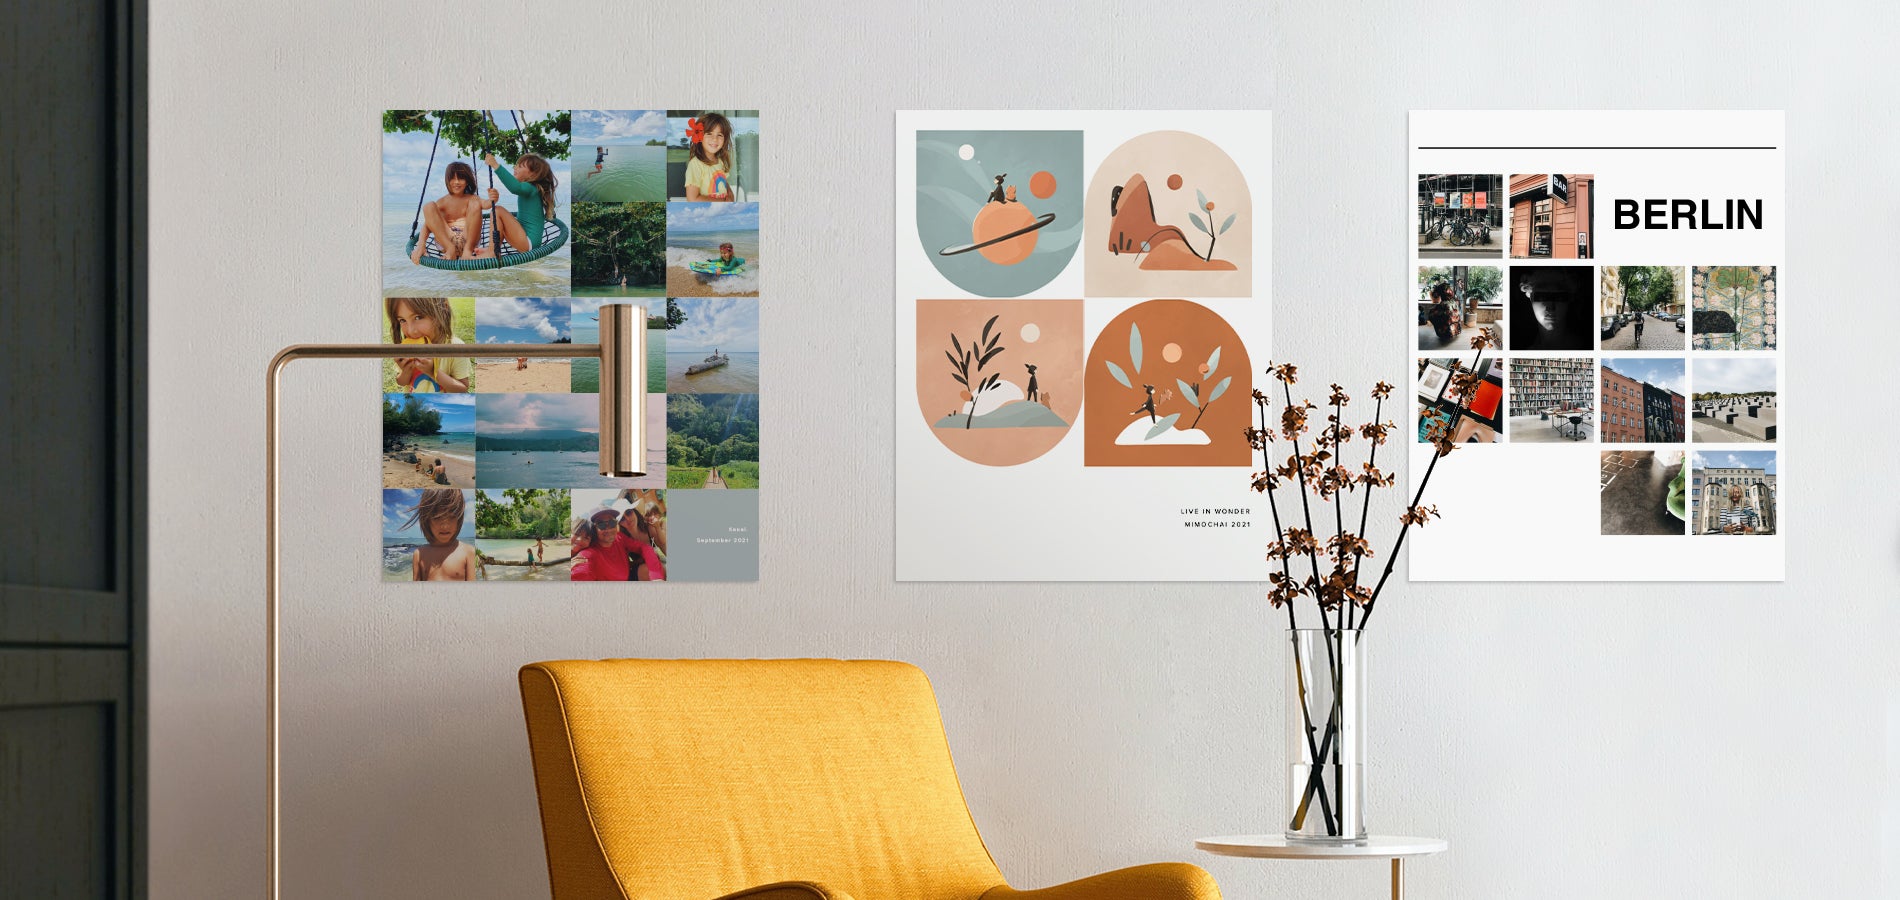 Three Artifact Uprising Poster Prints on wall above armchair featuring travel photos, illustrations, and more